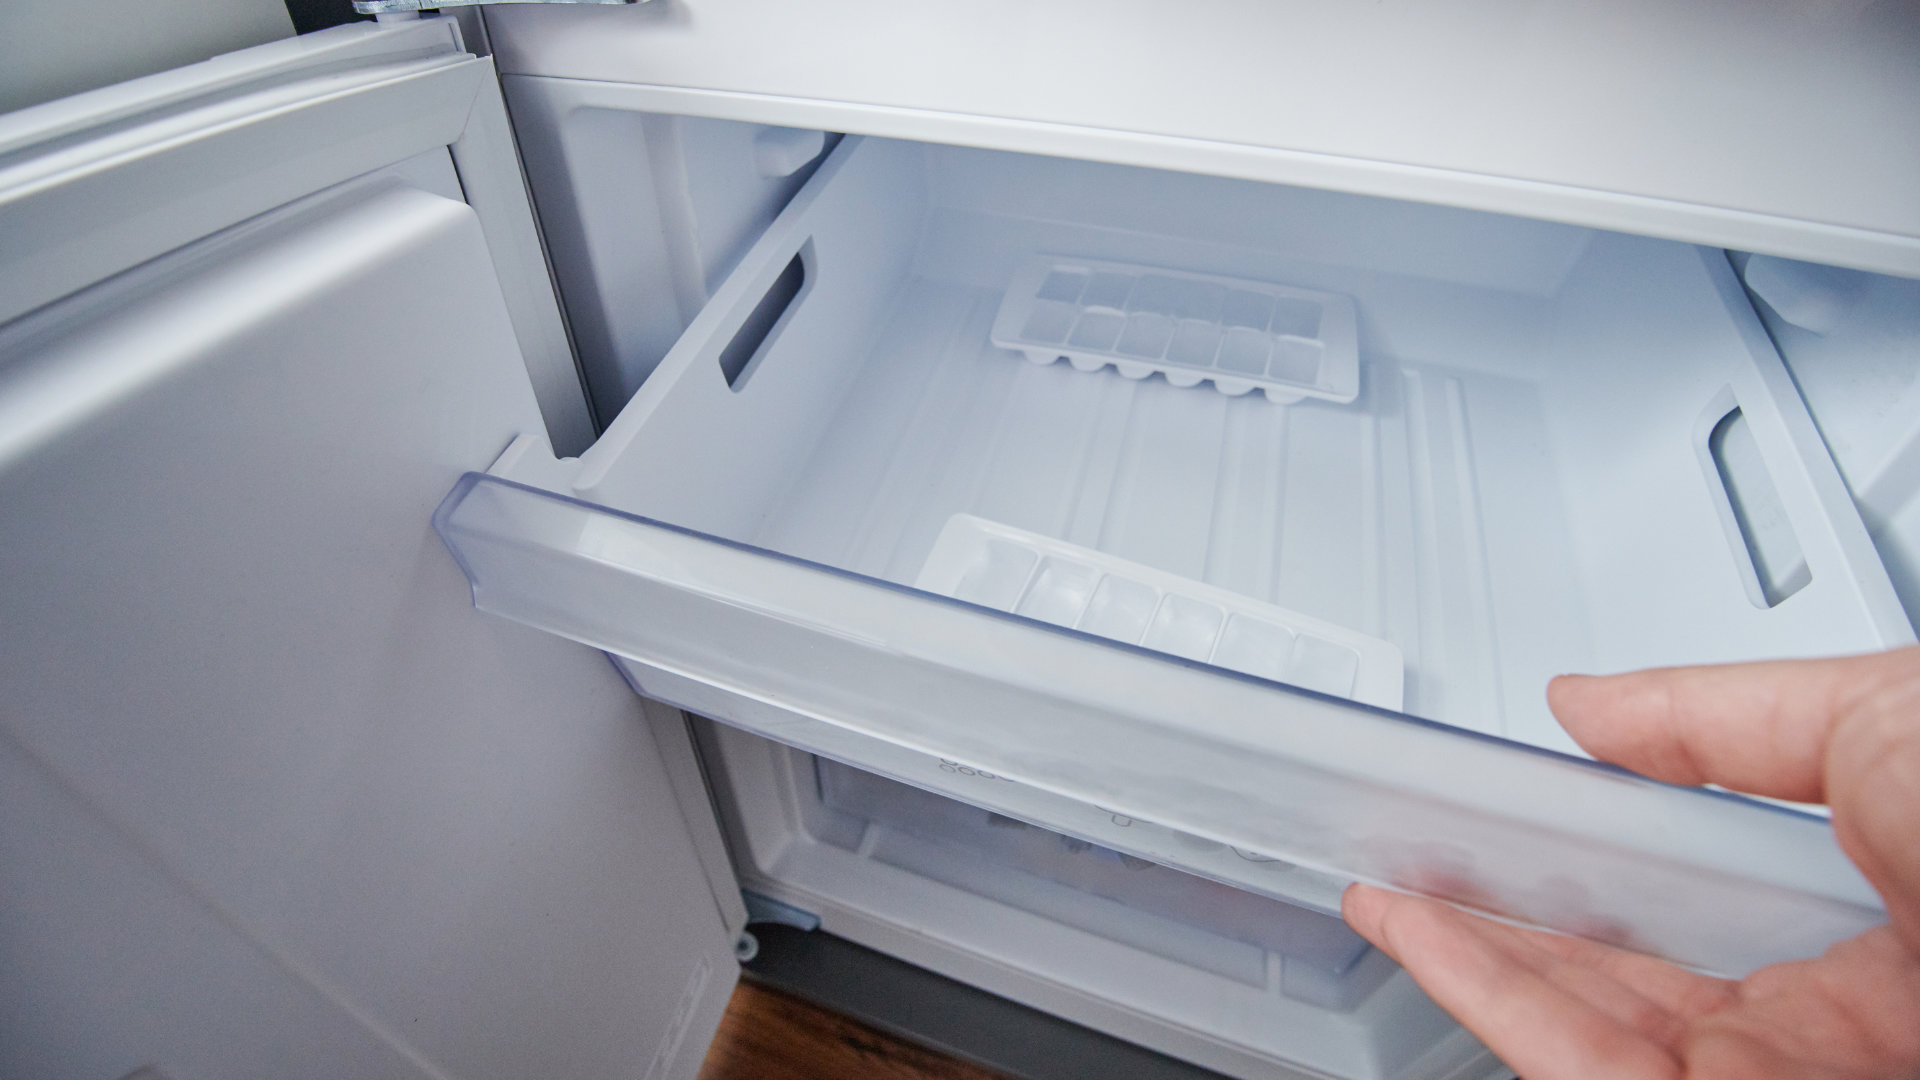 Featured image for “How to Fix Freezer Leaking Water into Fridge”